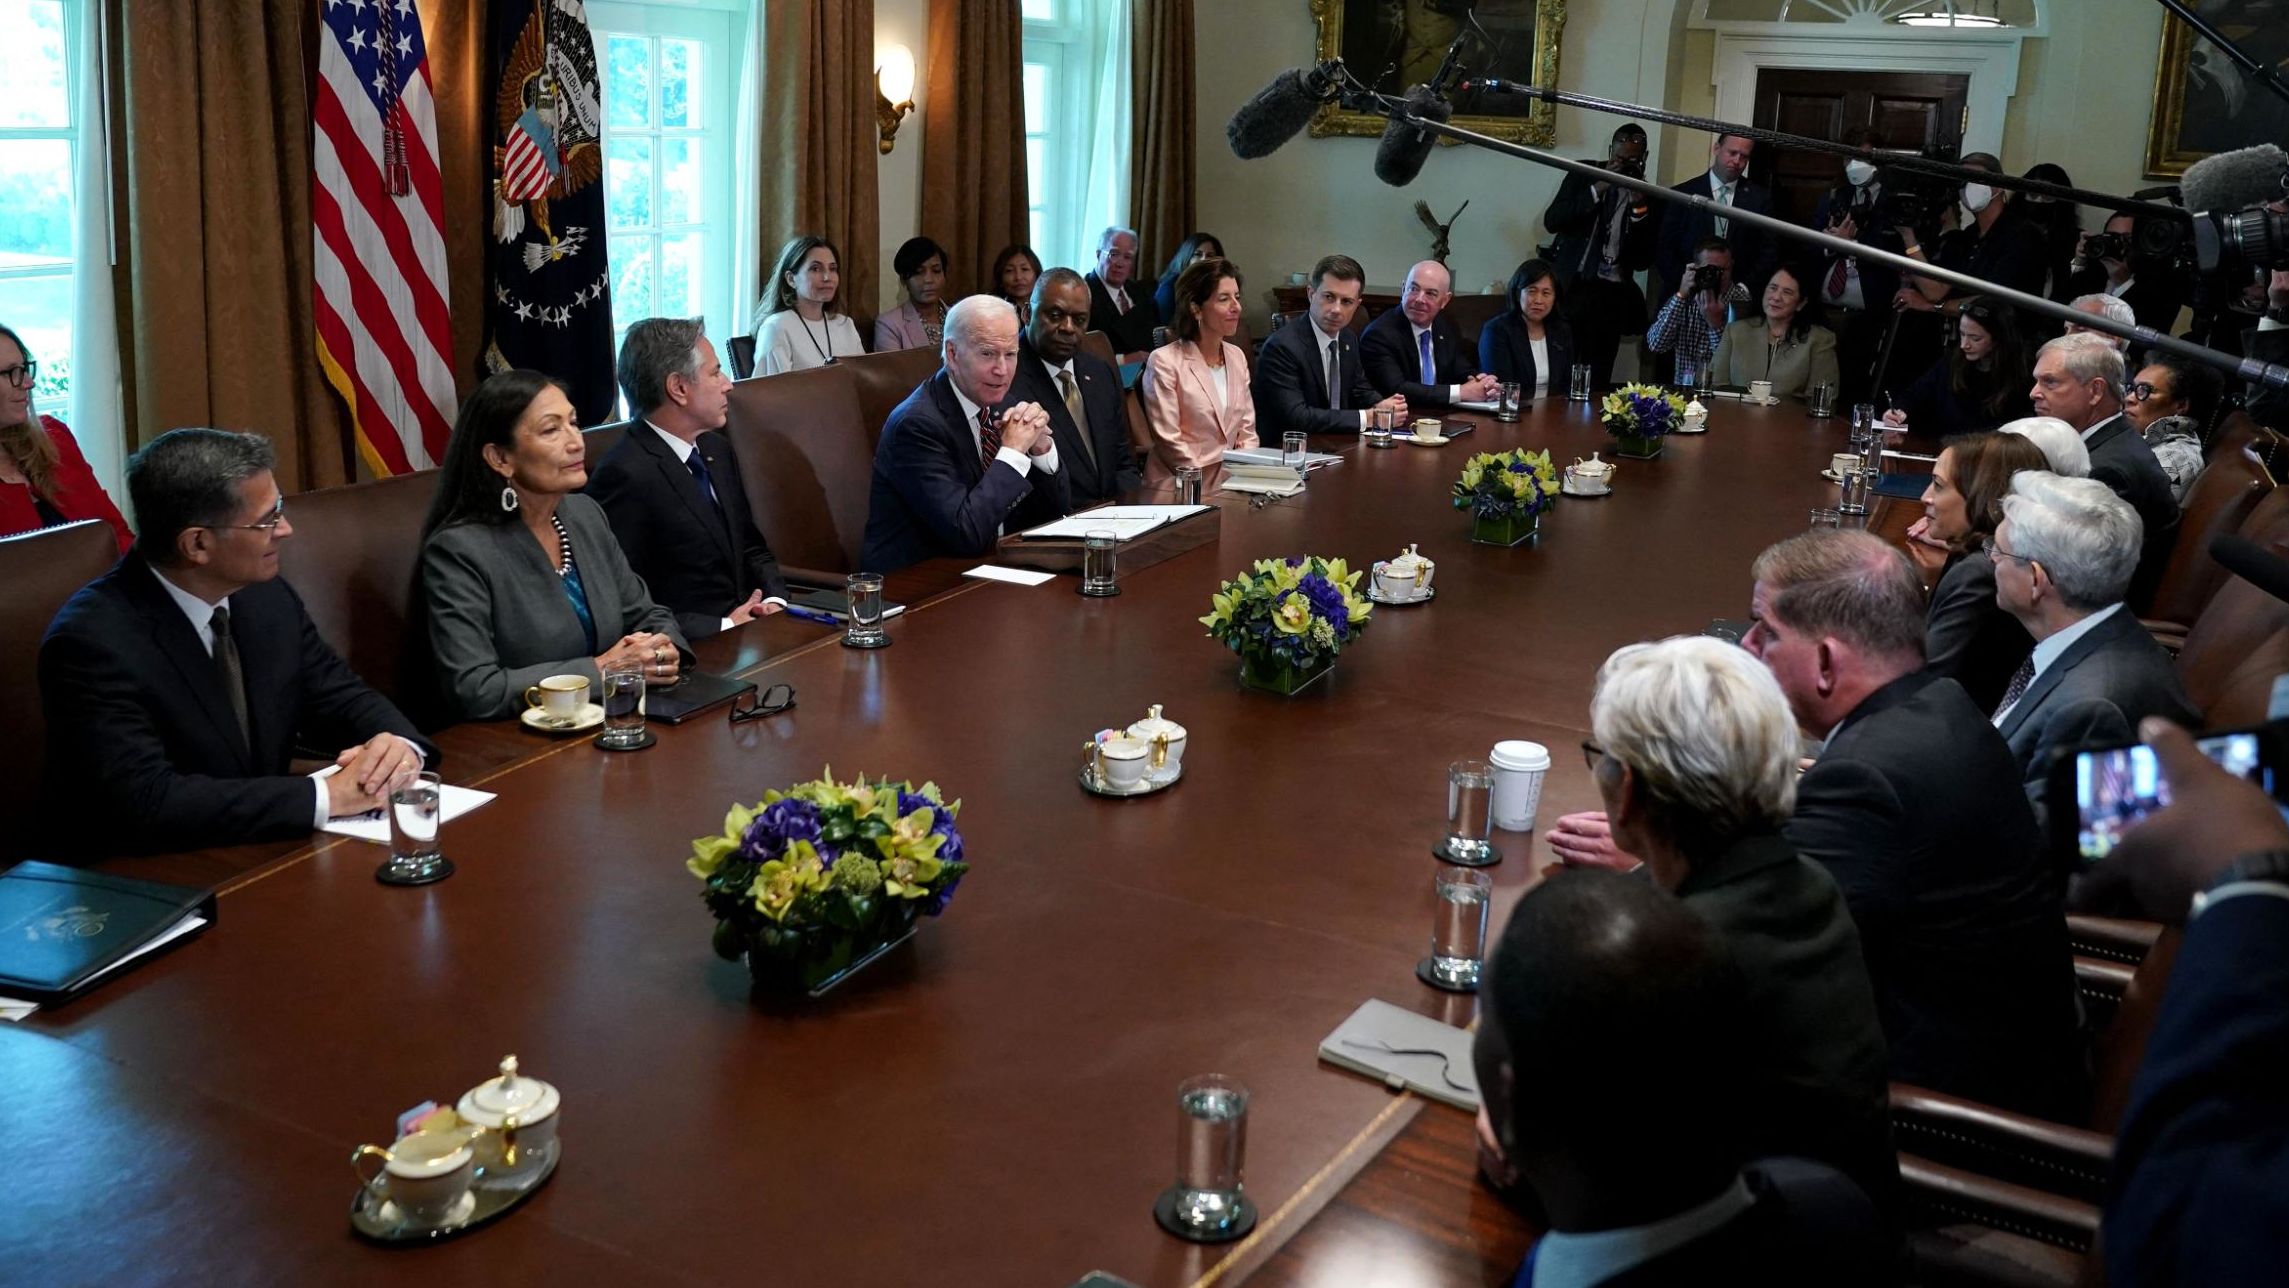 US President Joe Biden speaks to members of his cabinet during a meeting in the Cabinet Room of the White House in Washington, DC, on September 6, 2022. (Photo by MANDEL NGAN / AFP) (Photo by MANDEL NGAN/AFP via Getty Images)